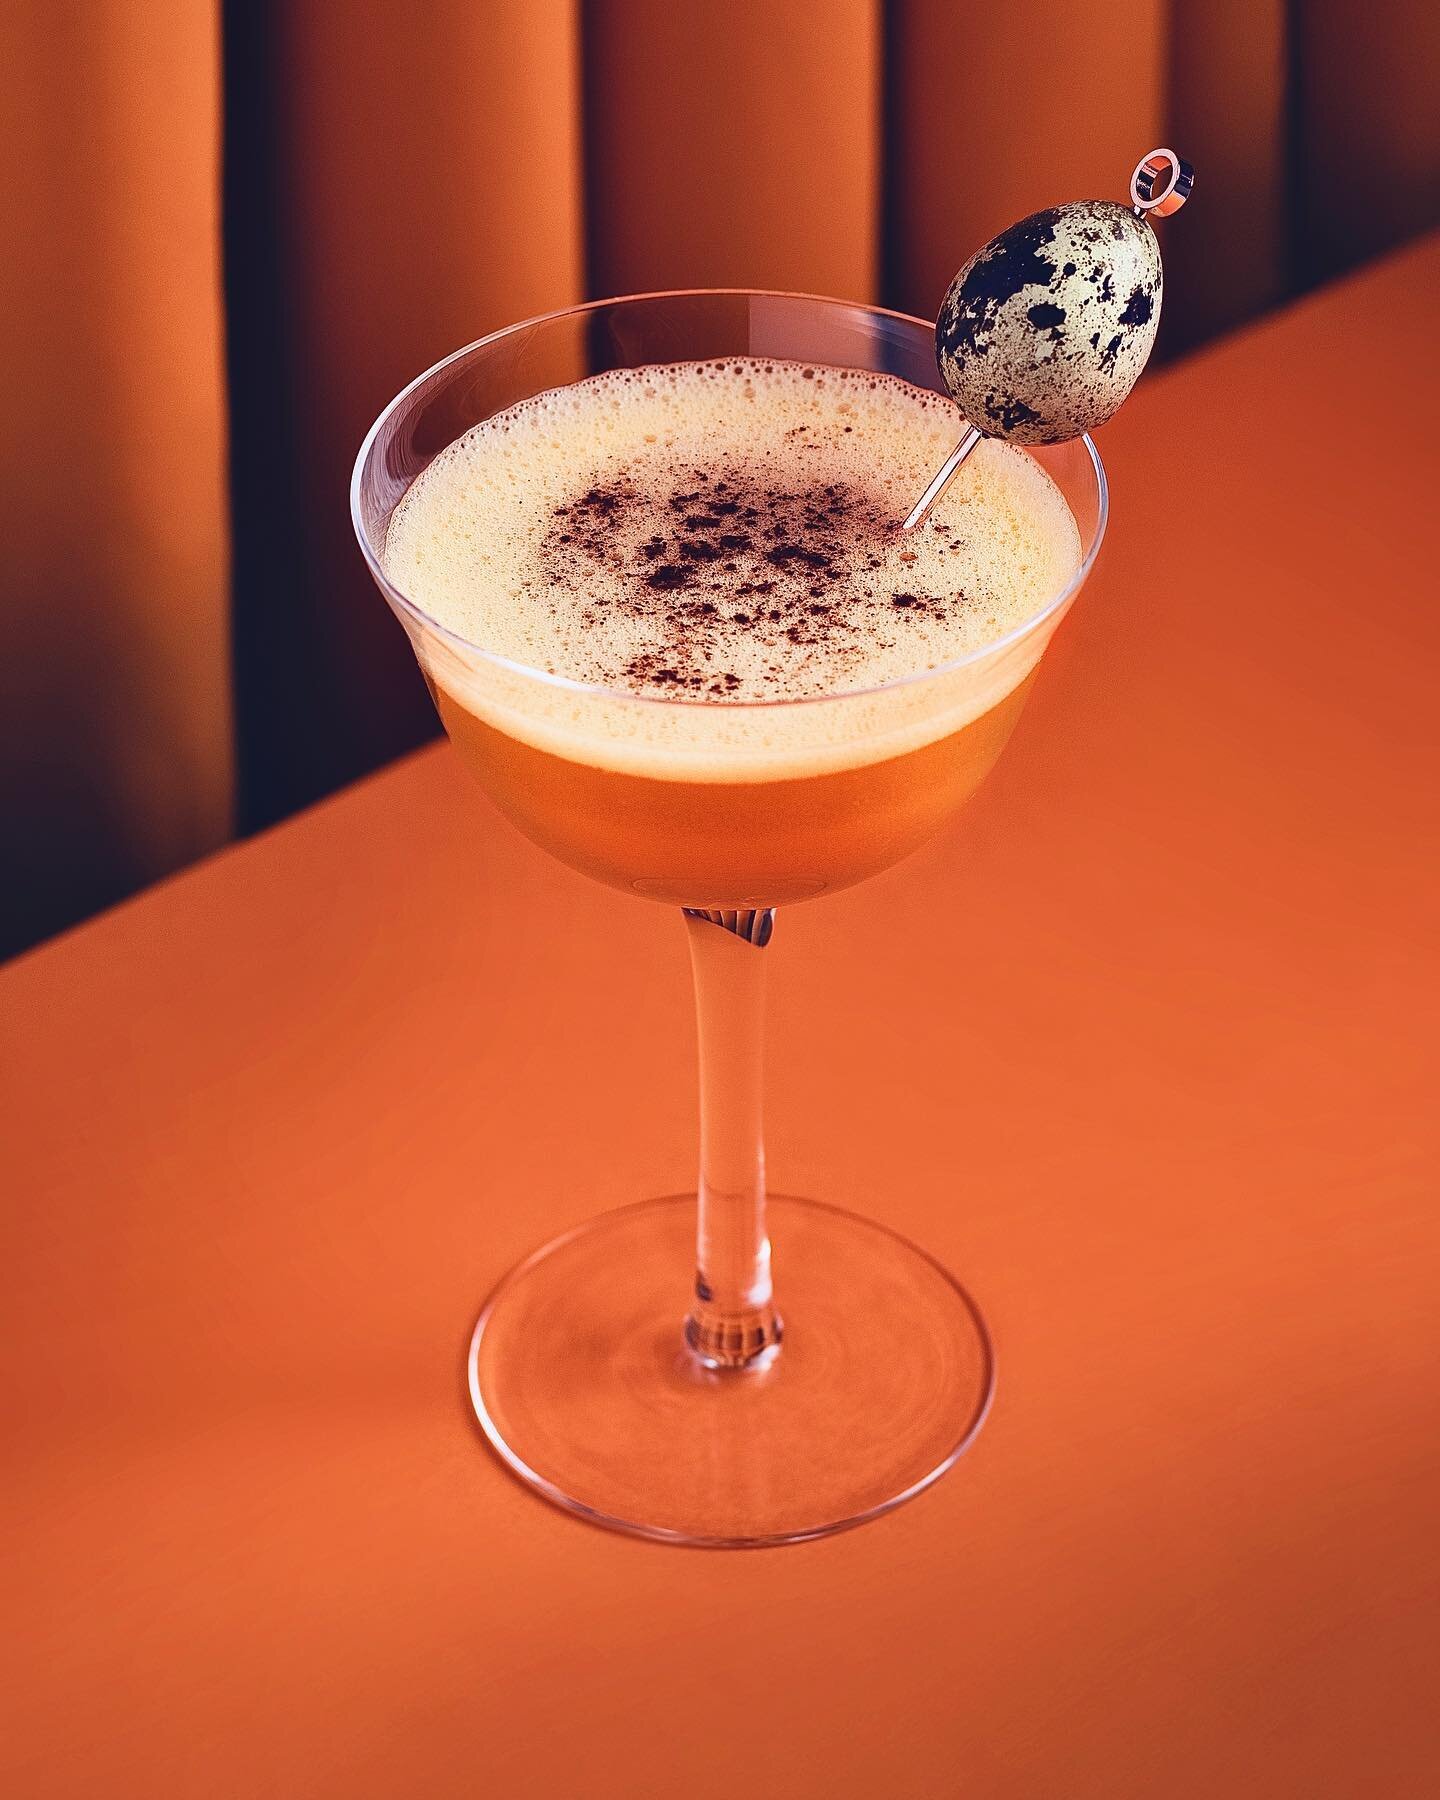 Happy Friday! Easter cocktail time🥕 try making a Carrot Cake Flip! Amazed at how @josue.allday was able to ad-lib this cocktail recipe from me saying &ldquo;I want to photograph a colorful Easter cocktail that has a little quail egg sitting on top&r